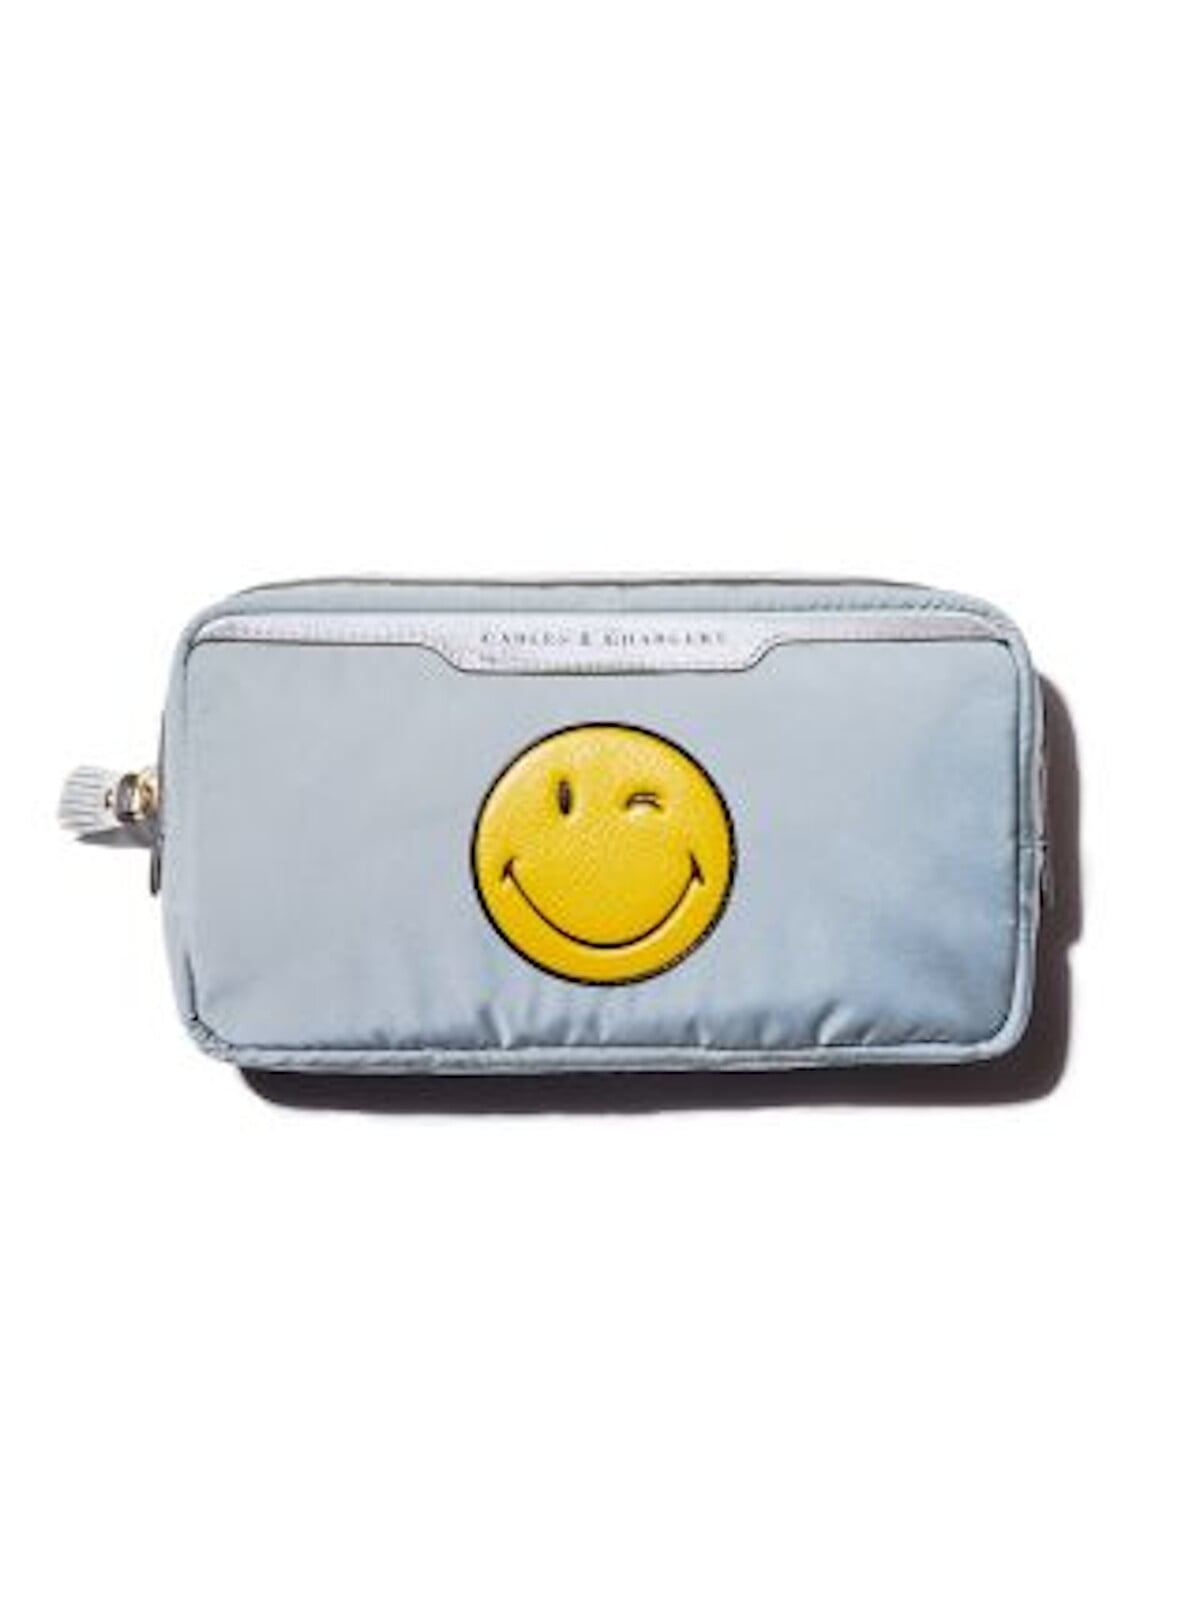 Anya Hindmarch Smiling Face Neon Yellow Leather Zip Pouch/Clutch Bag Wallet  | eBay